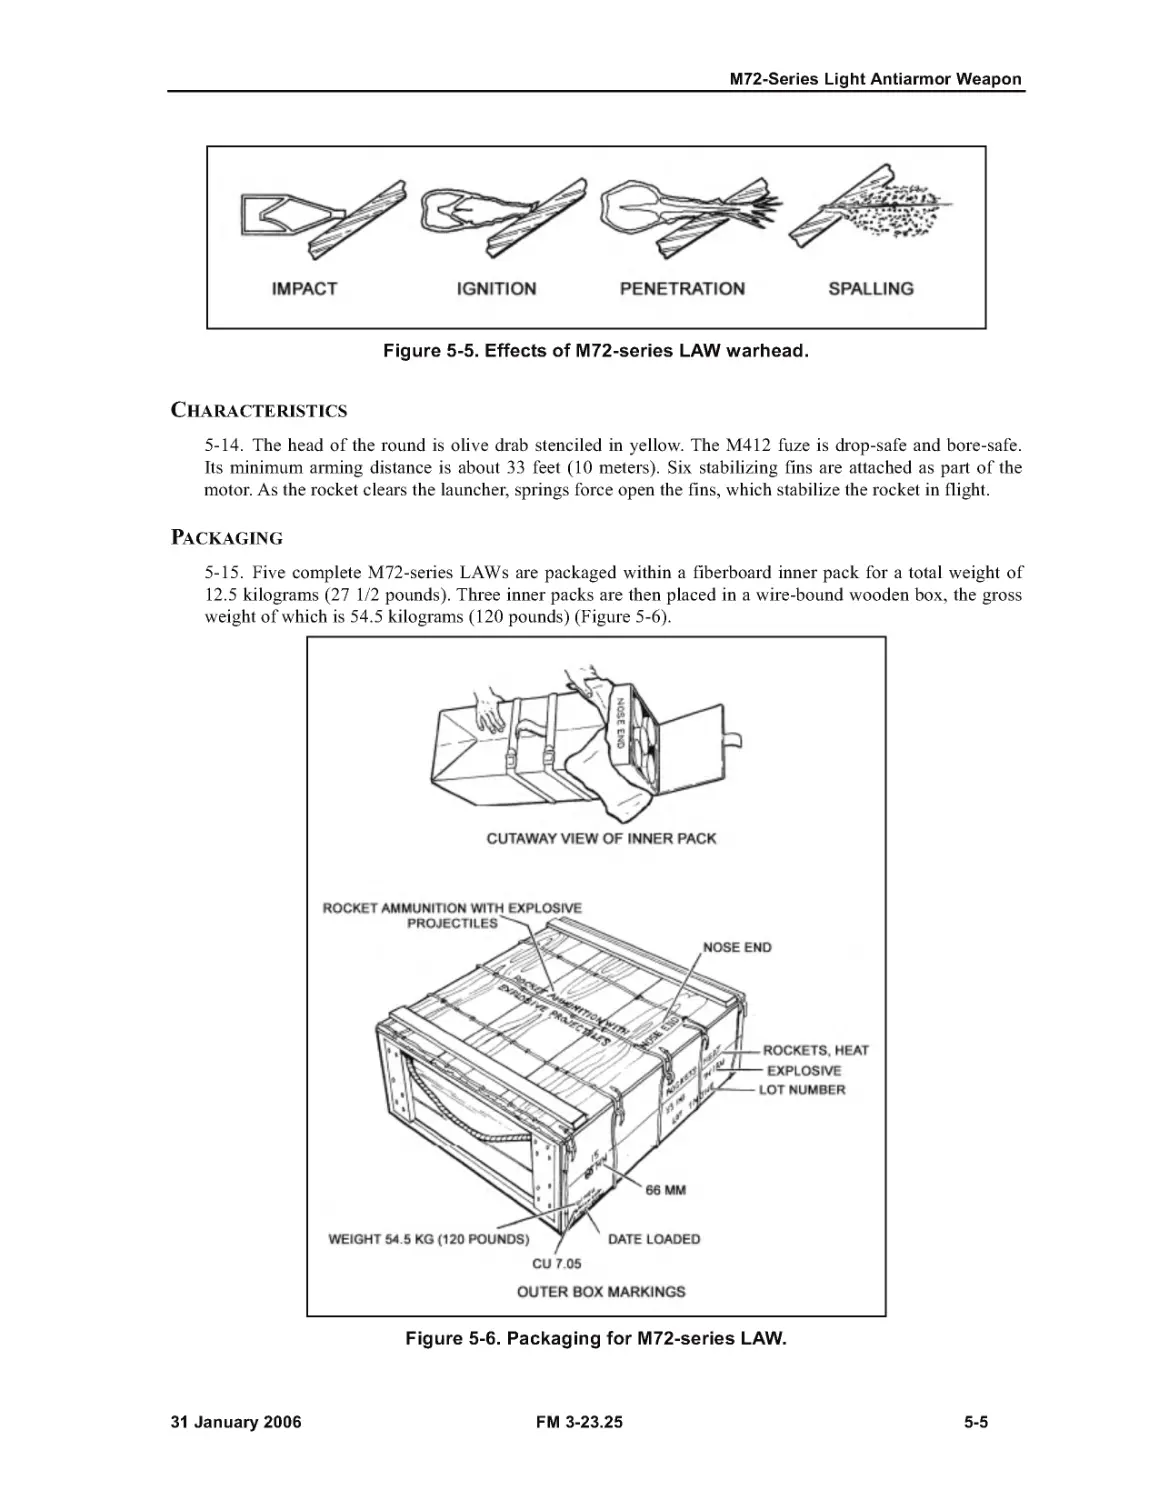 Figure 5-5. Effects of M72-series LAW warhead.
Figure 5-6. Packaging for M72-series LAW.